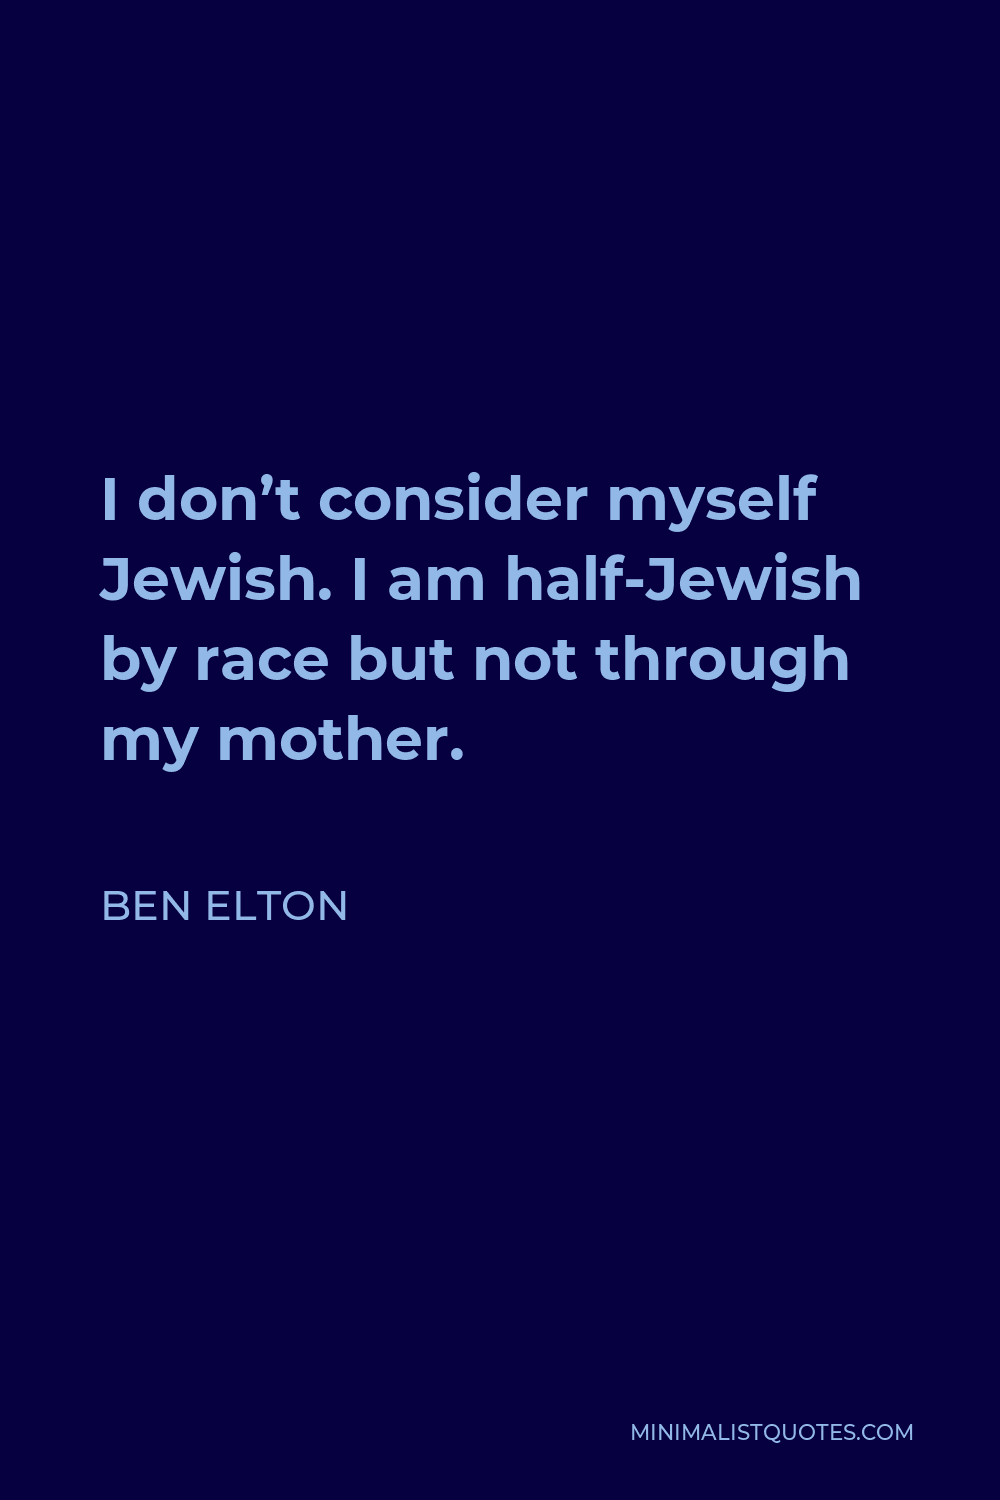 Ben Elton Quote - I don’t consider myself Jewish. I am half-Jewish by race but not through my mother.